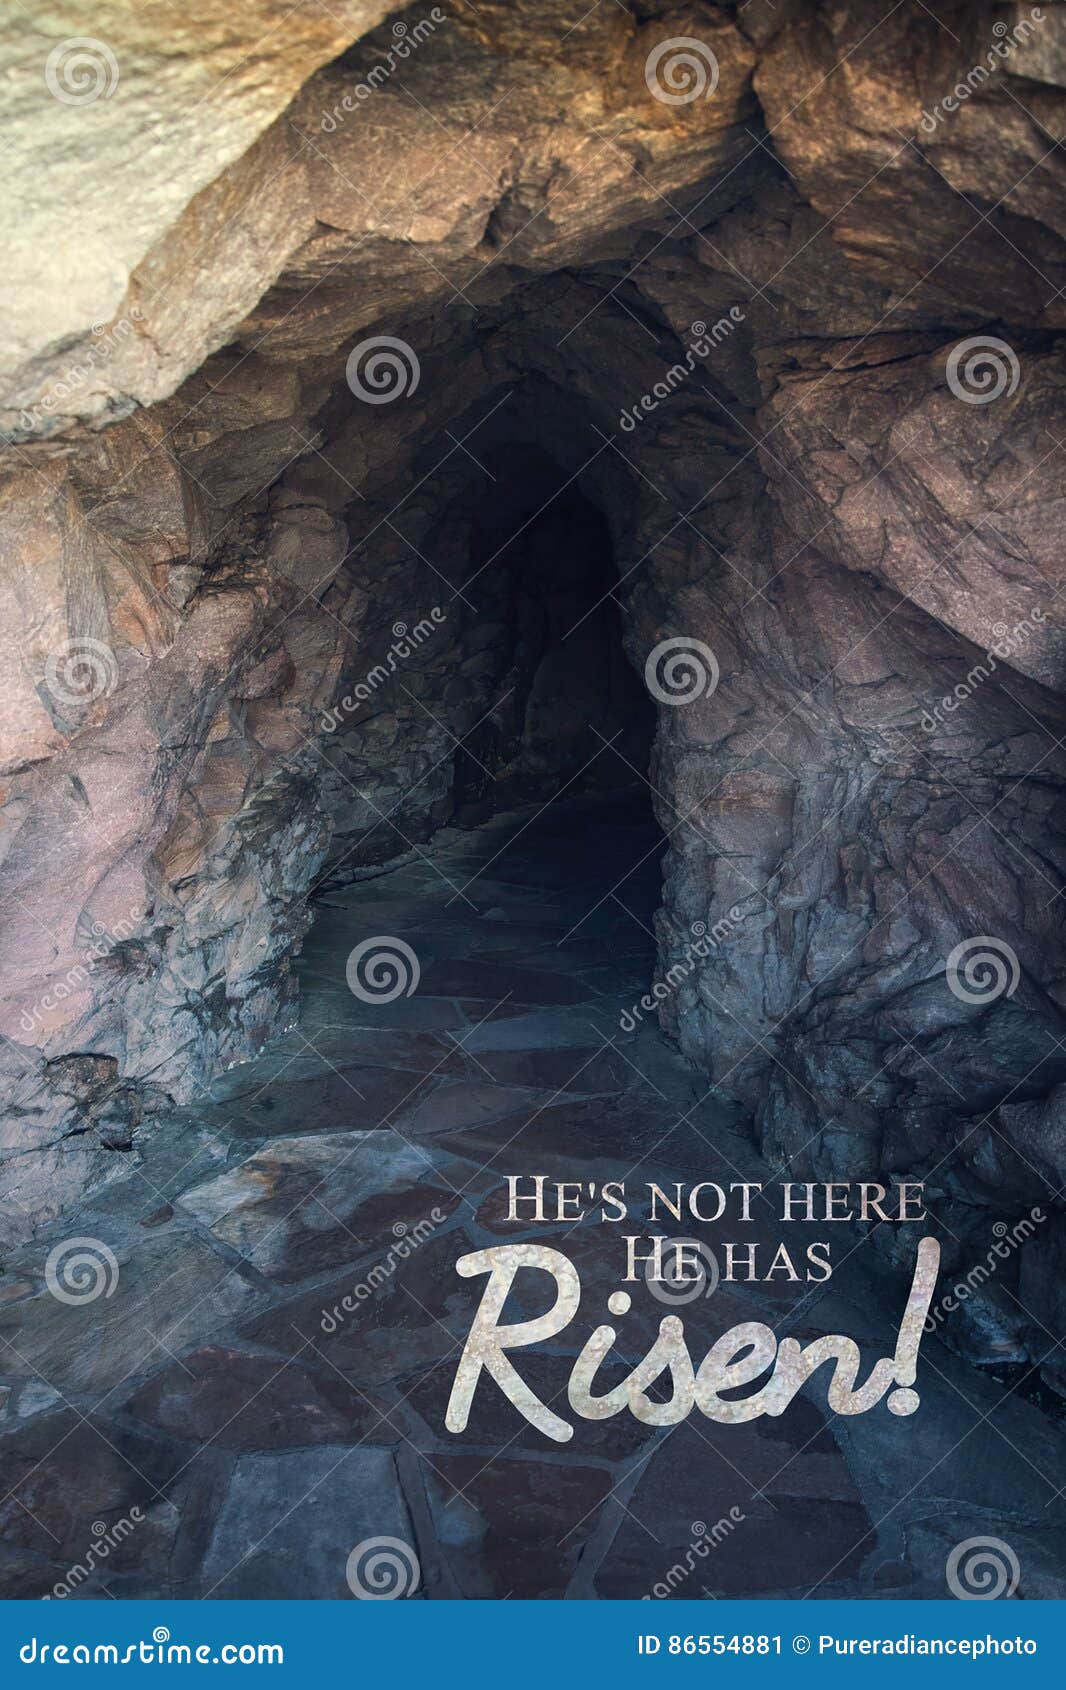 he has risen photo for easter with bible passage